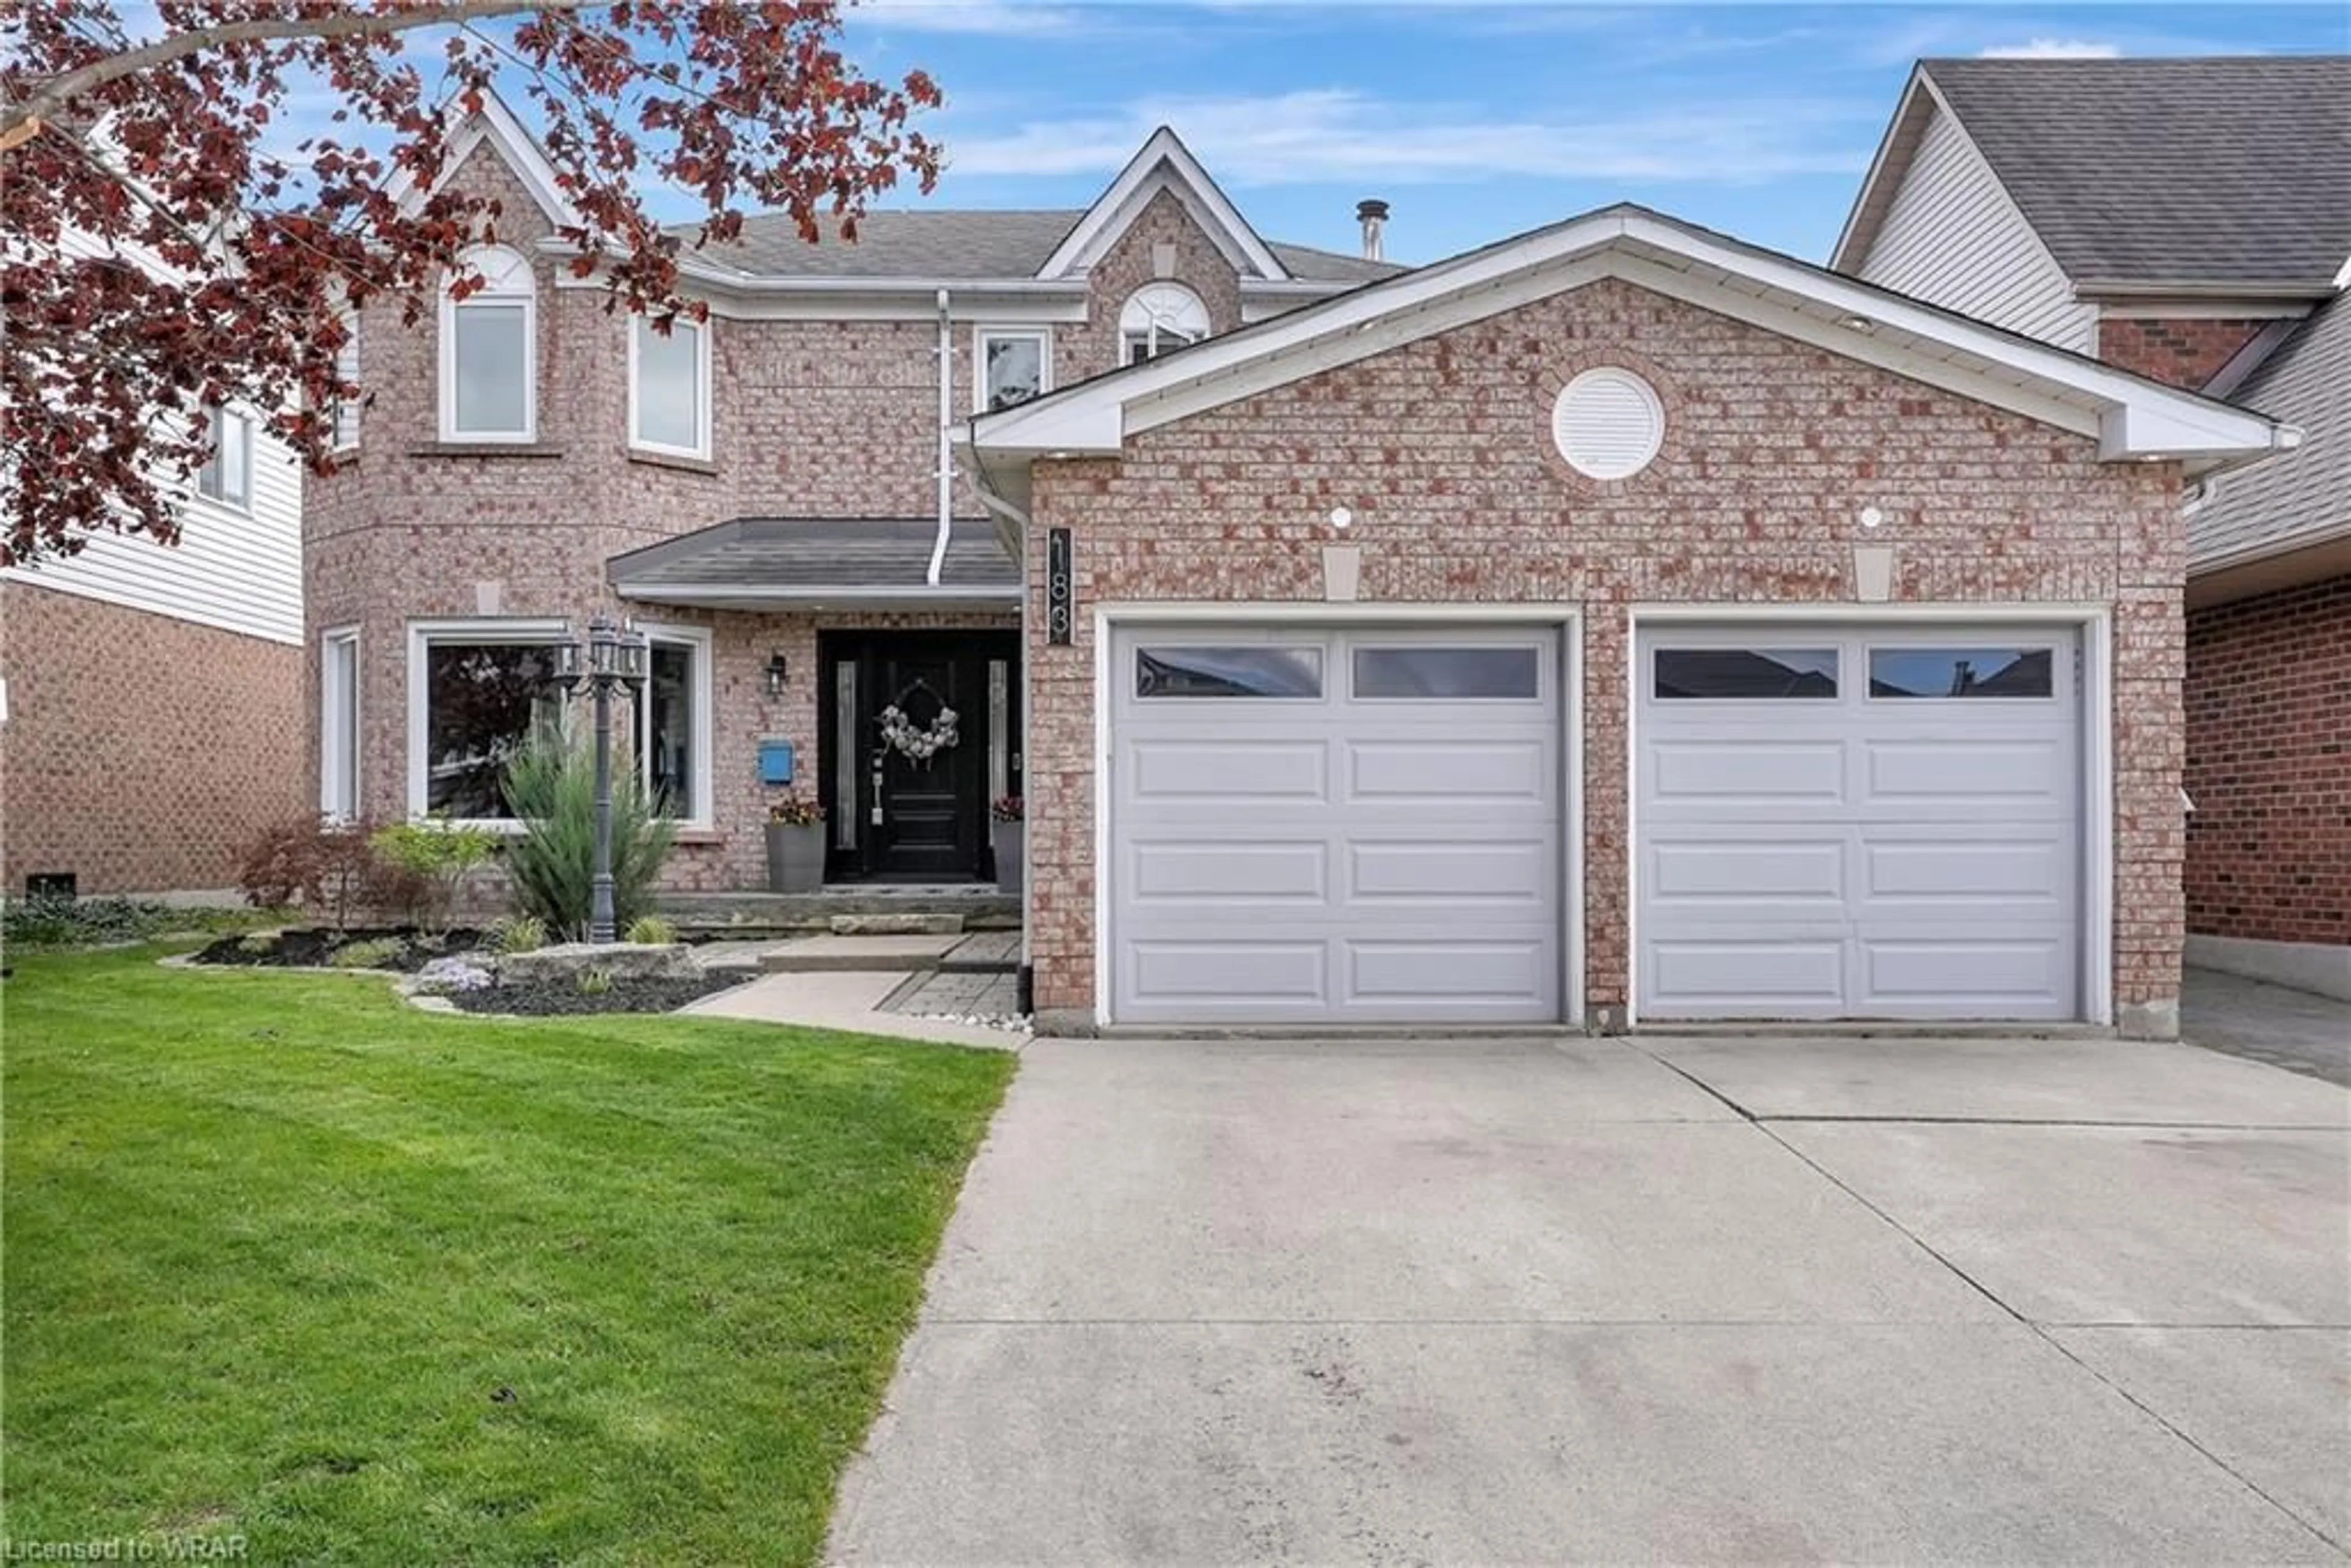 Home with brick exterior material for 183 Glenvalley Dr, Cambridge Ontario N1T 1R2